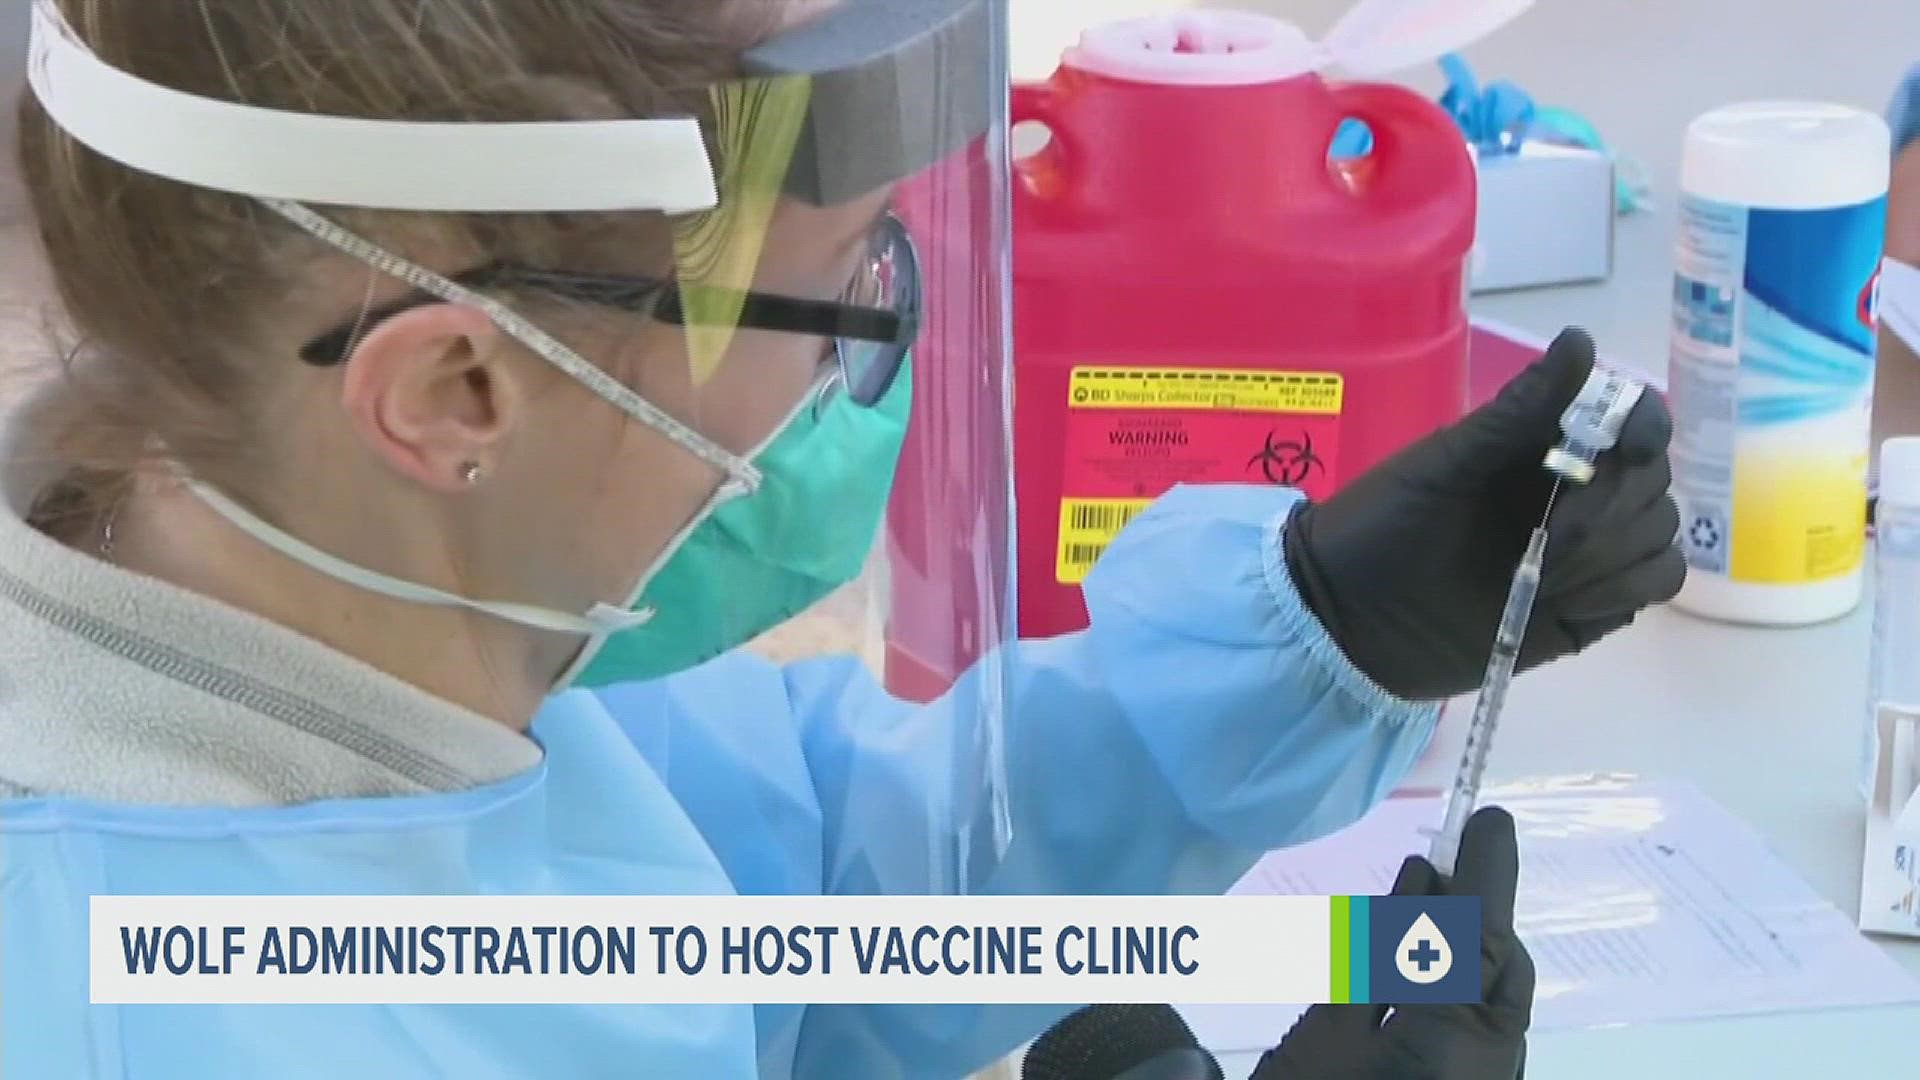 In an effort to make sure the COVID-19 vaccine is available to the community, the Wolf Administration is holding a vaccine clinic in Harrisburg.